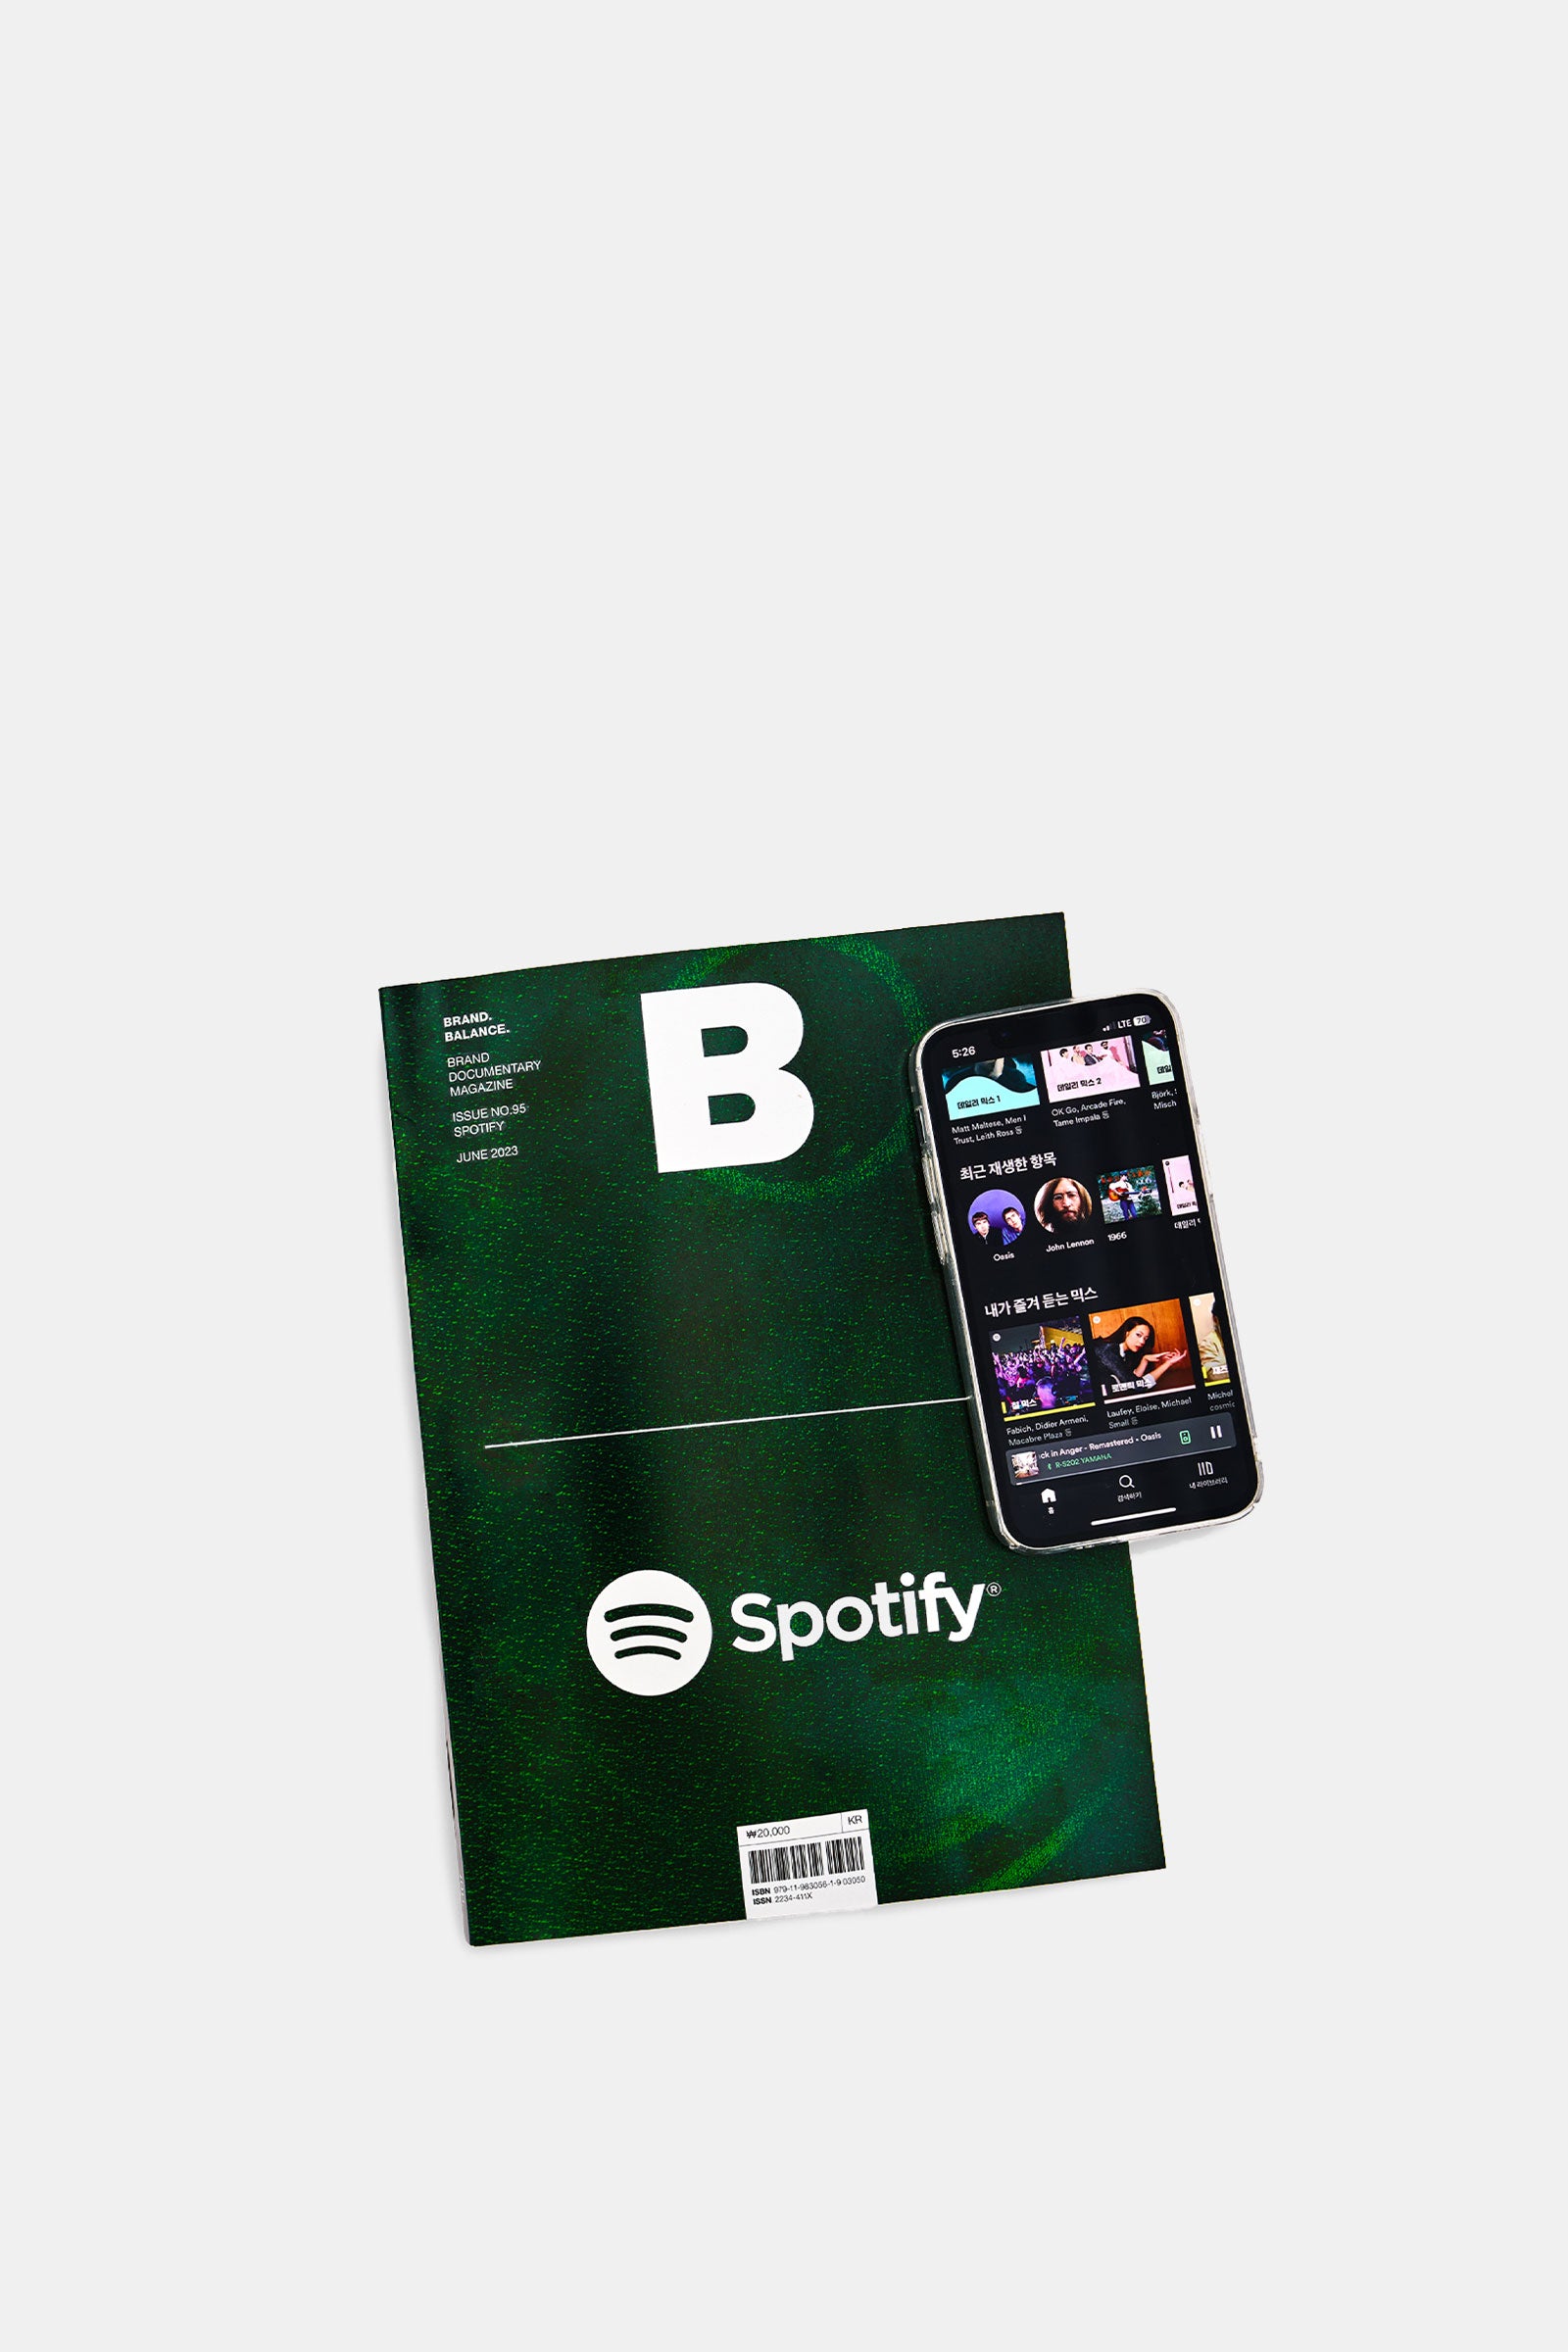 Spotify - Issue No.95